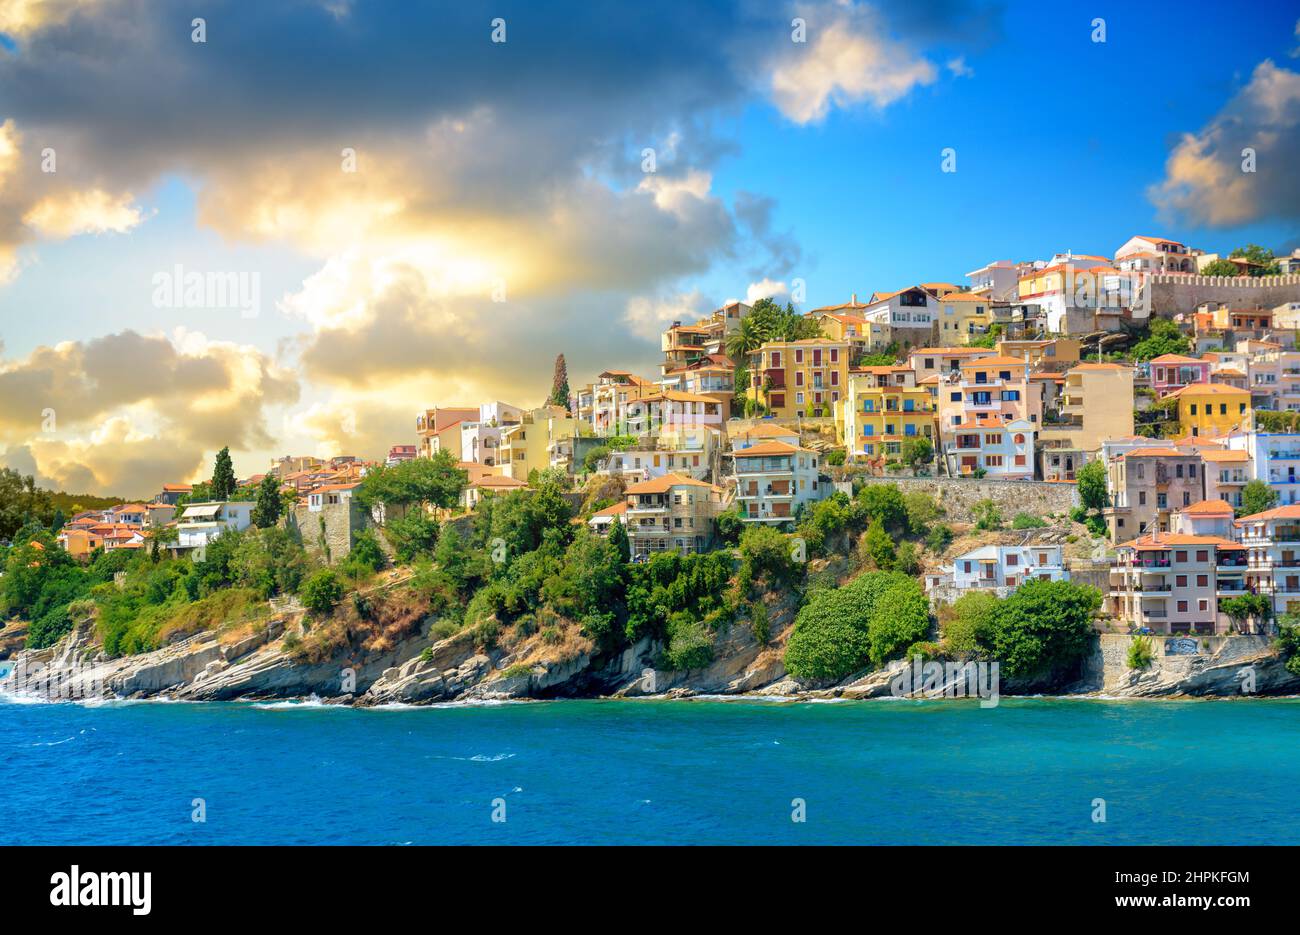 old Greek city located on the island, at sunset Stock Photo